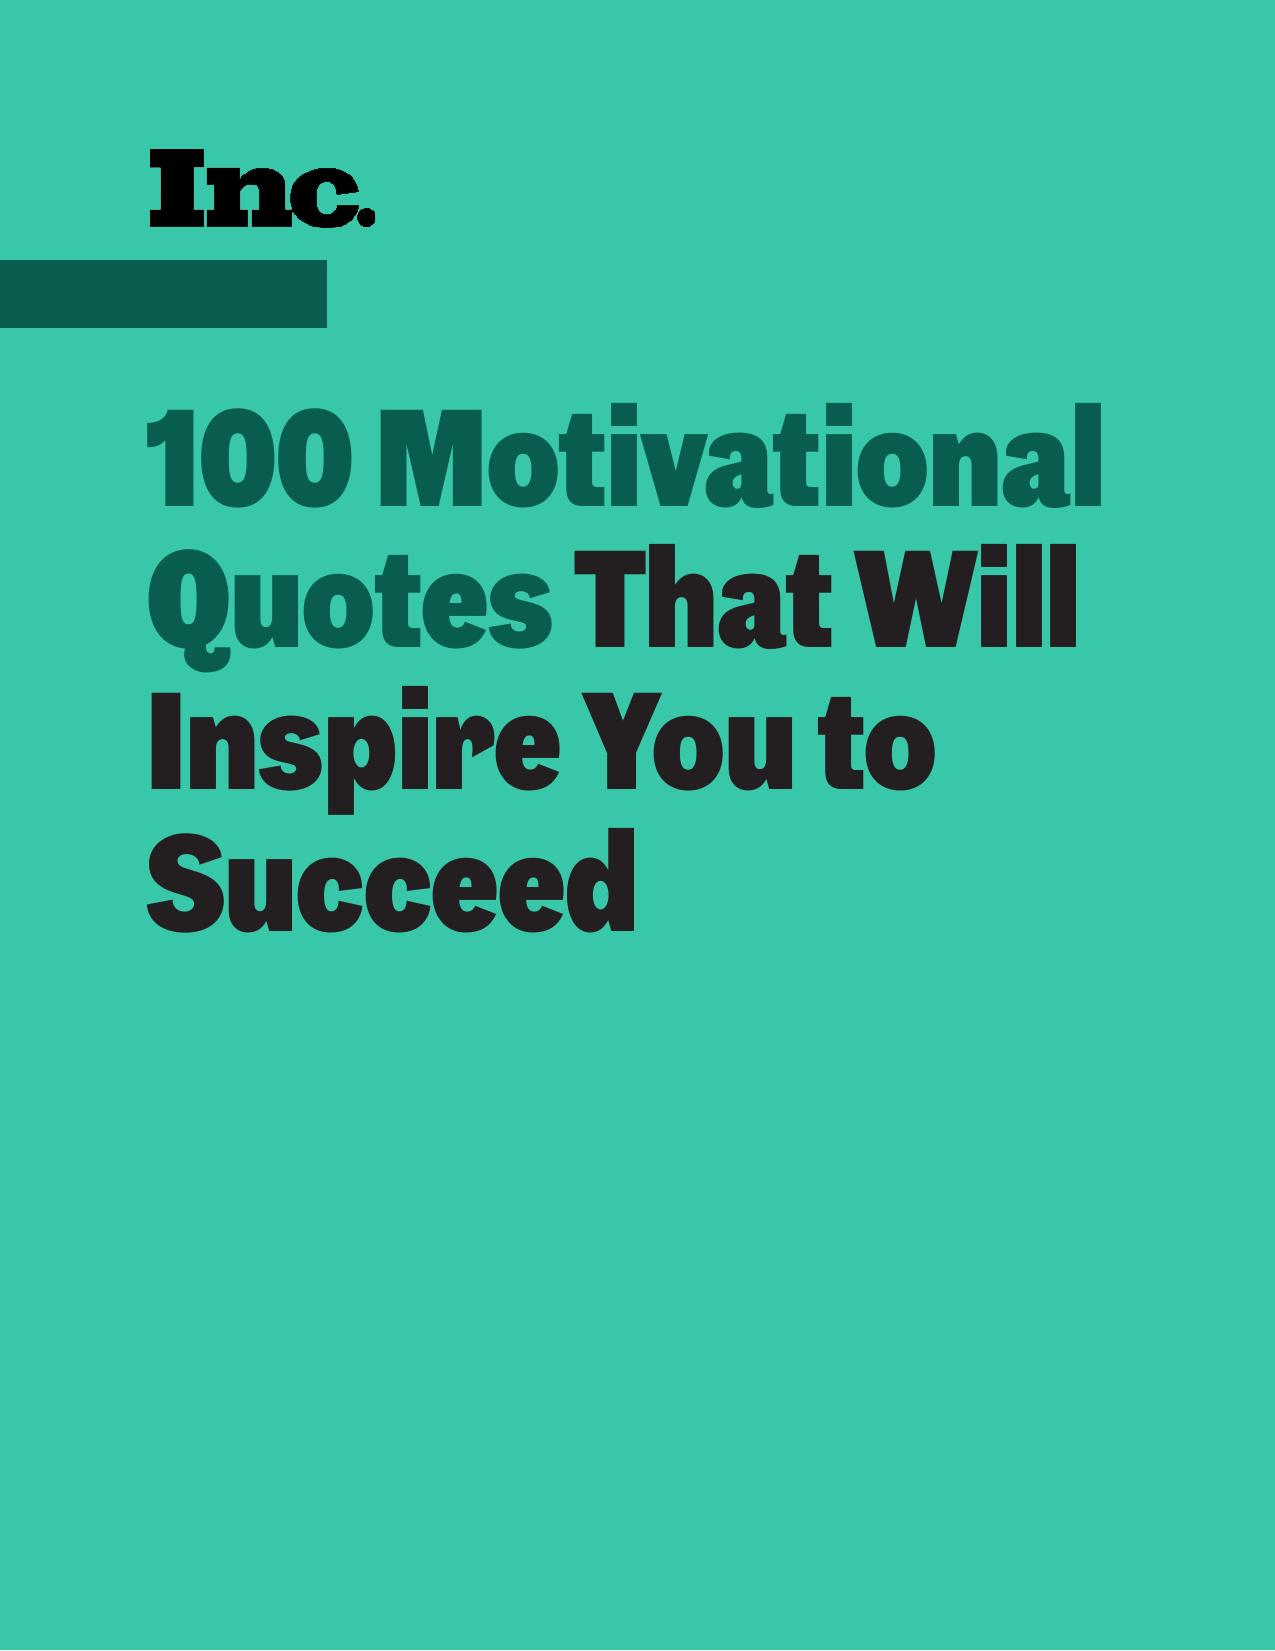 100 Motivational Quotes That Will Inspire You to Succeed